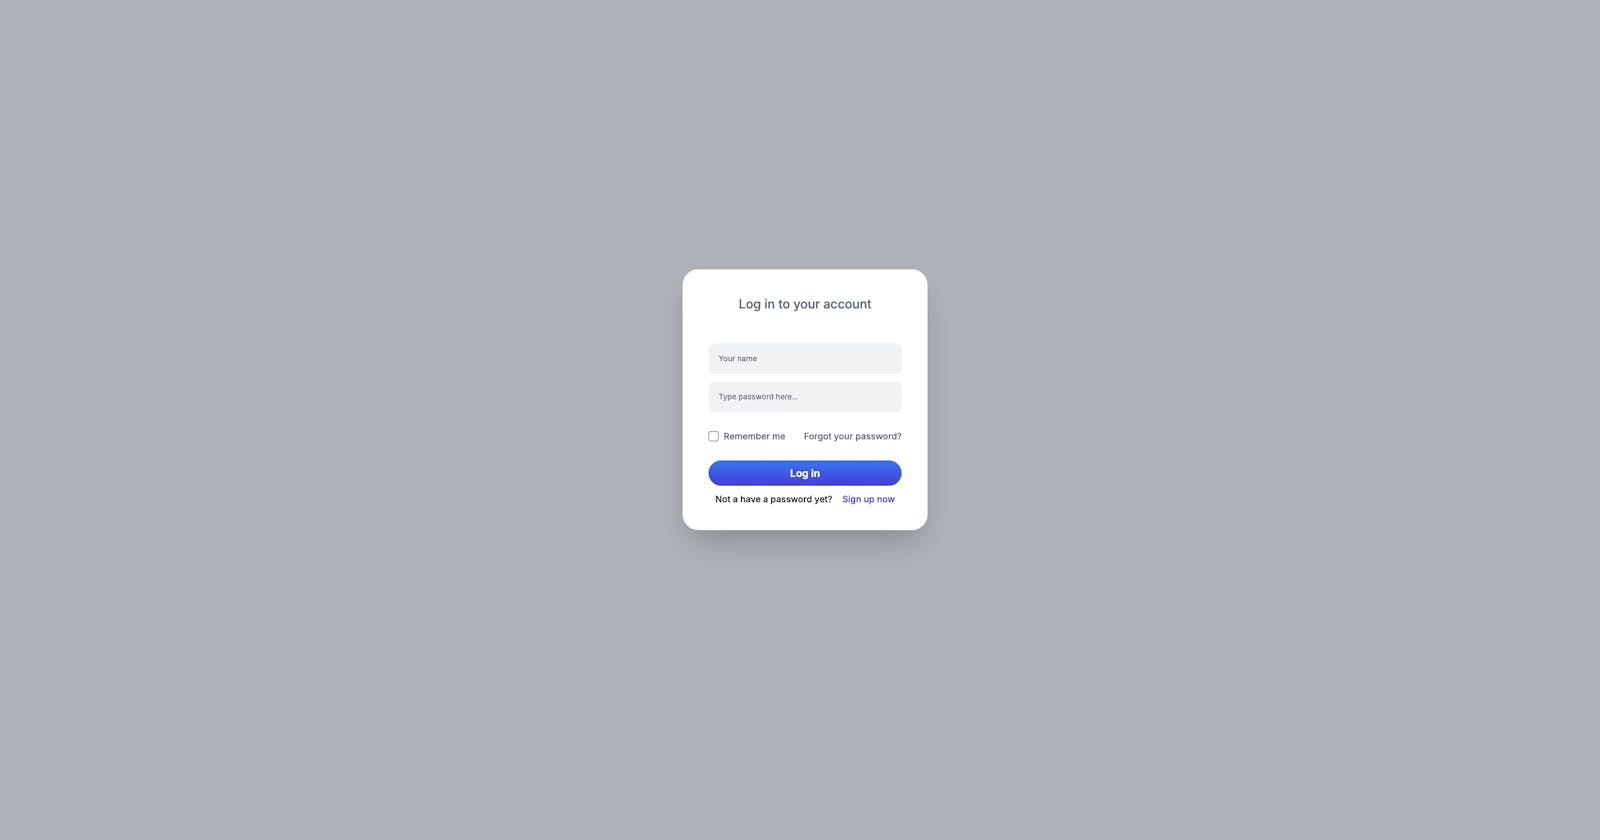 How to create an animated log in modal with Tailwind CSS and Alpine.js